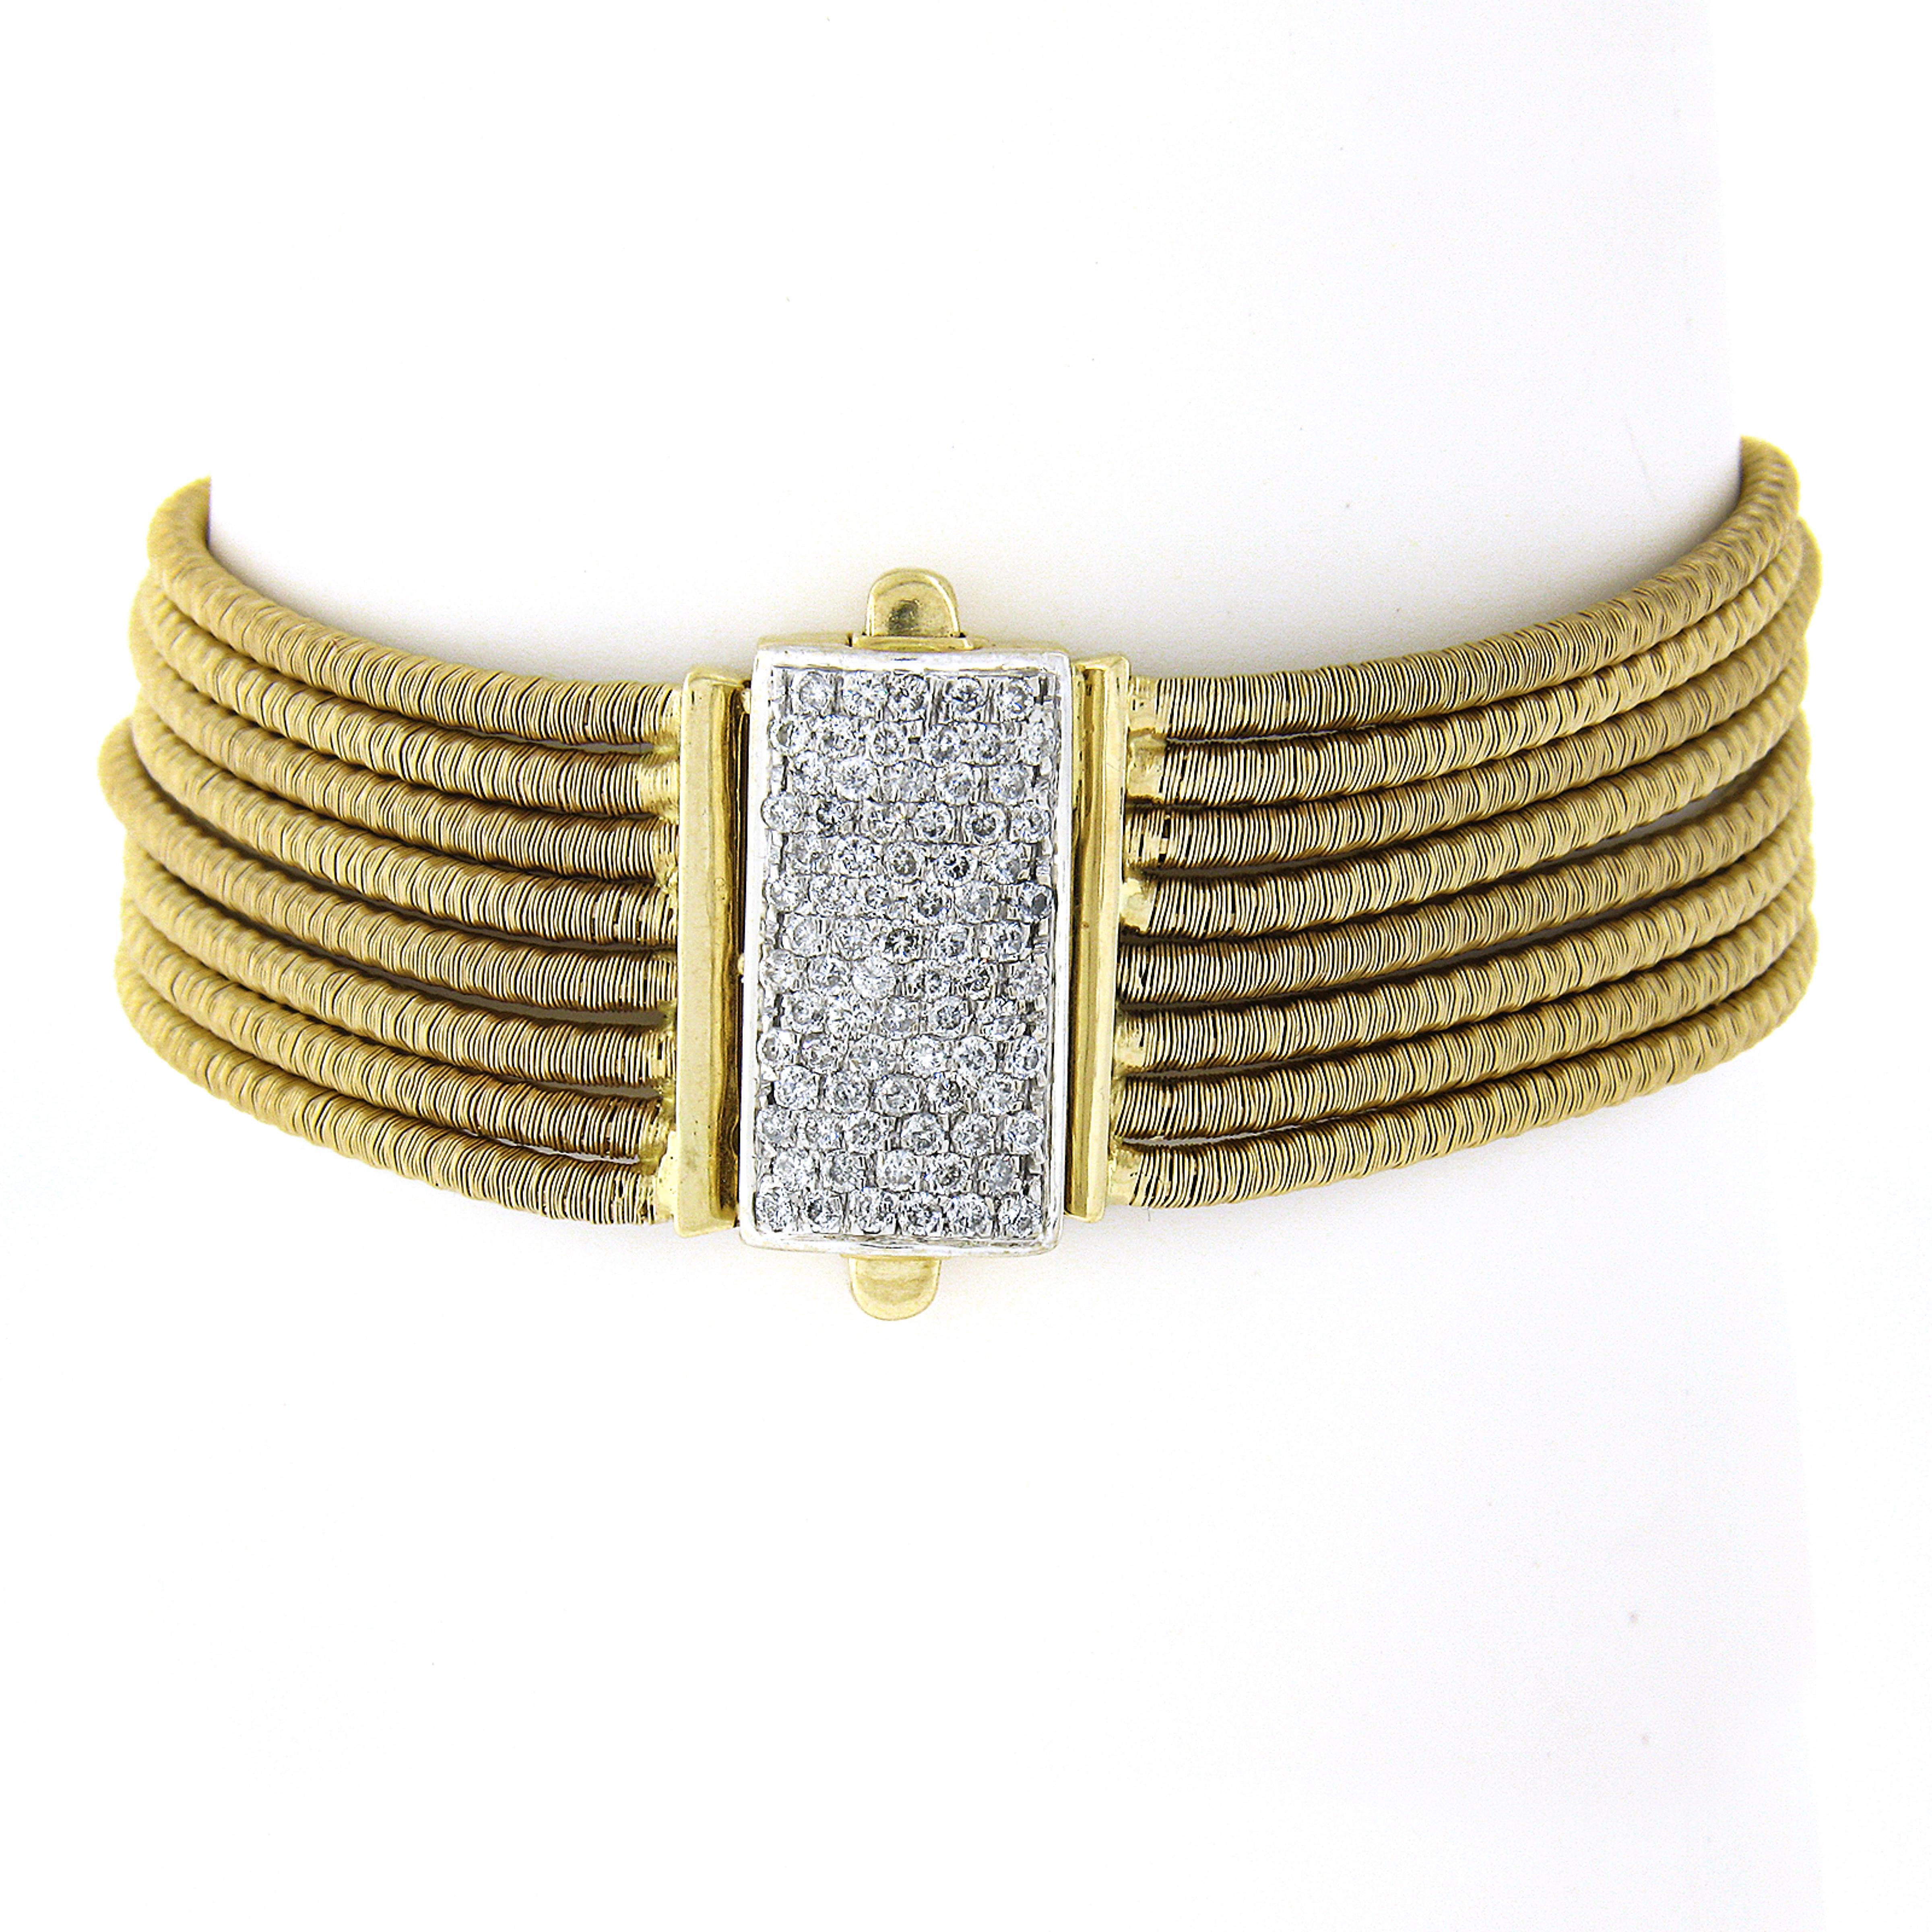 Here we have a beautiful multi strand gold bracelet crafted in solid 14k yellow gold. It feature very fine and well done coiled gold wire that wraps around each strand and offers soft silky feel around the wrist. The clasp is fully encrusted with